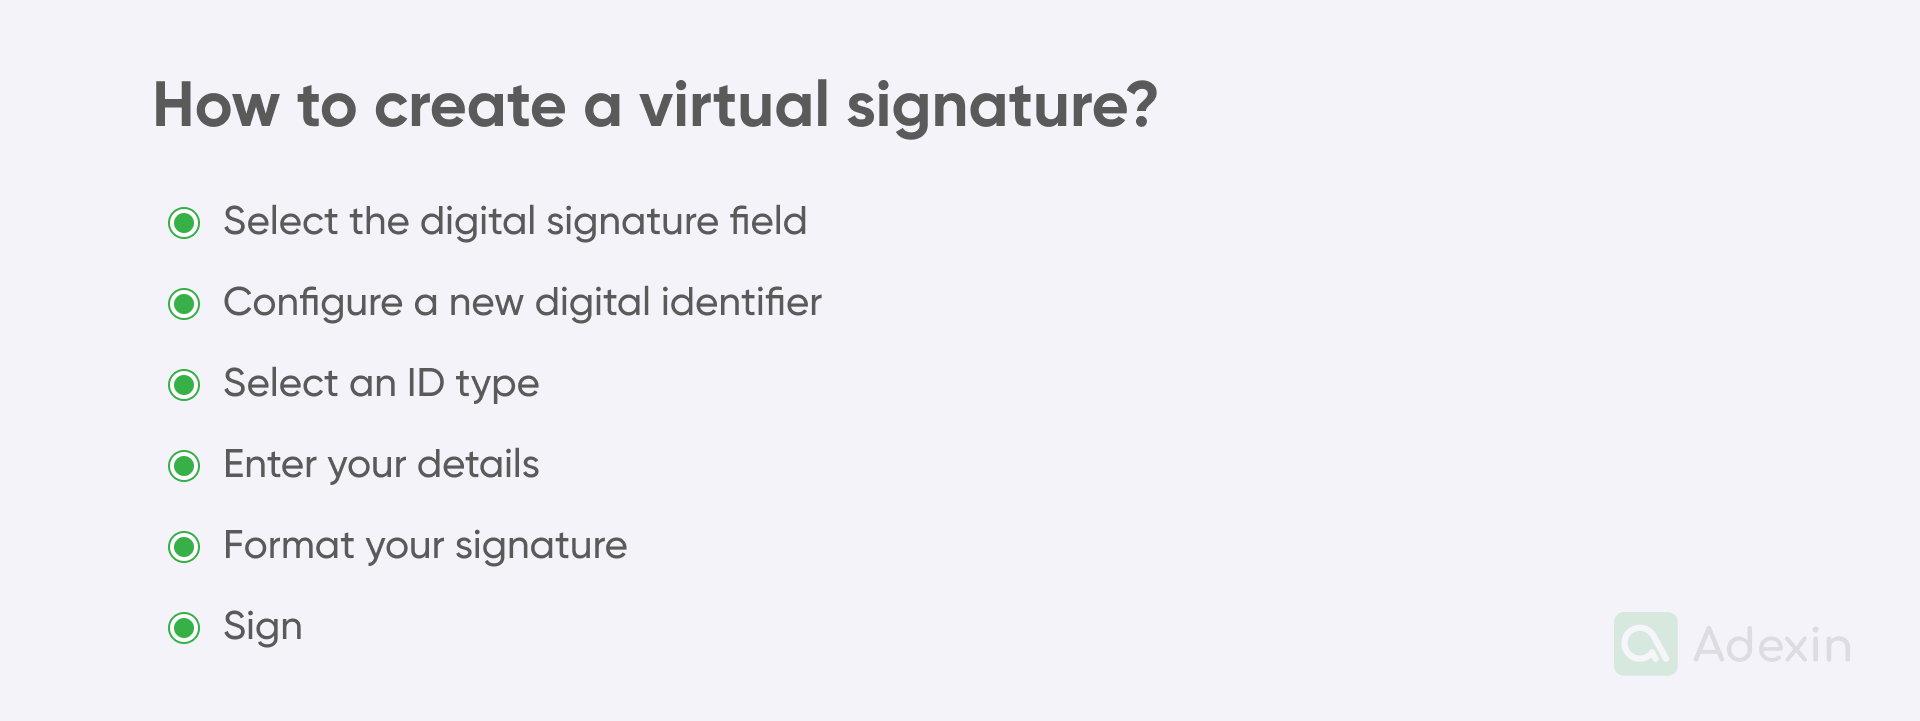 The process of creating a virtual signature